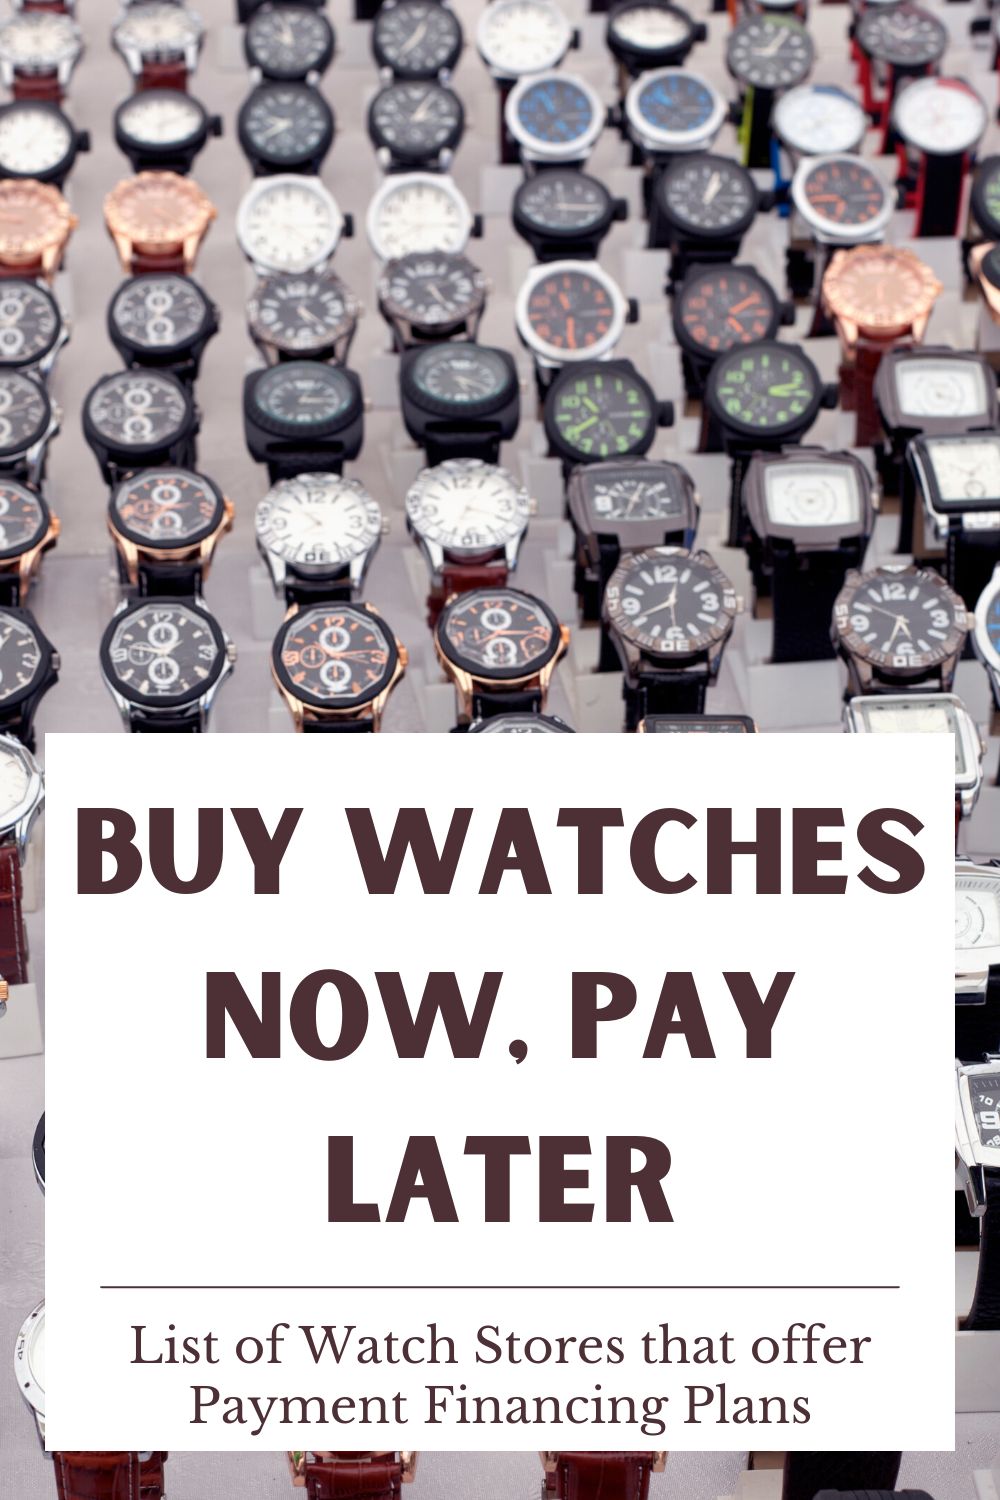 List of Watch Stores that offer Payment Financing Plans